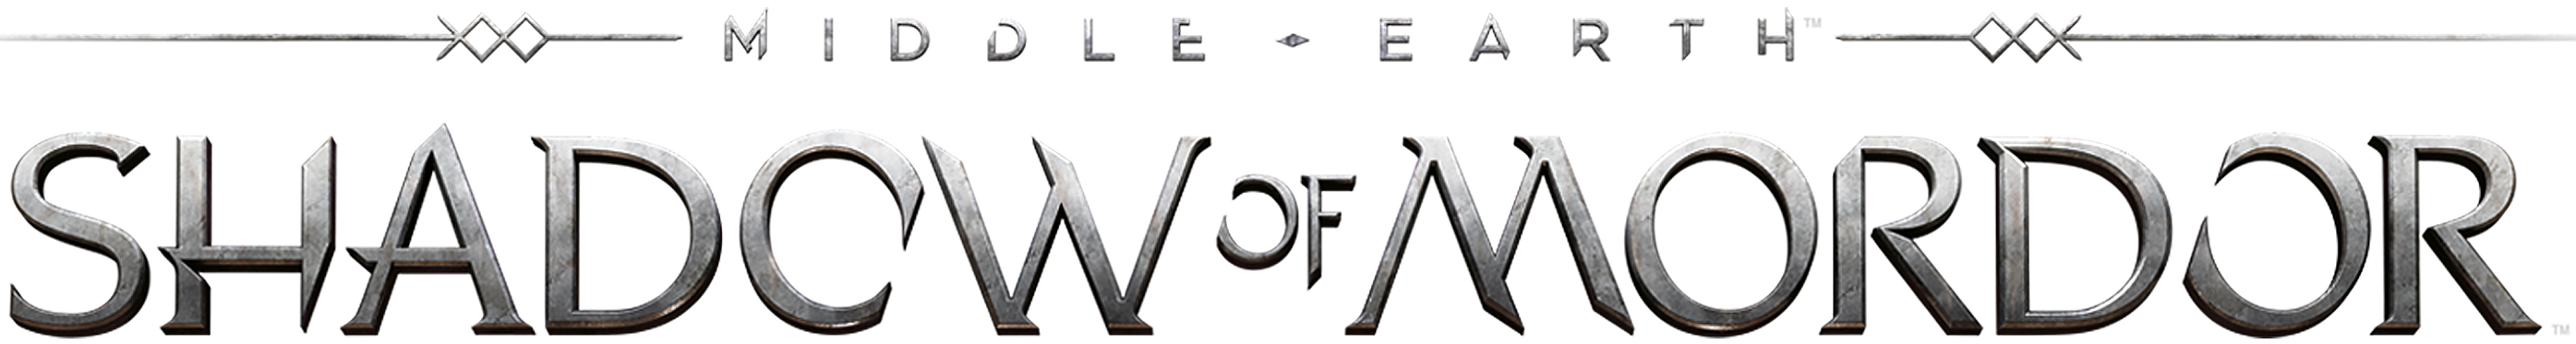 Middle-earth™: Shadow of Mordor™ Game of the Year Edition